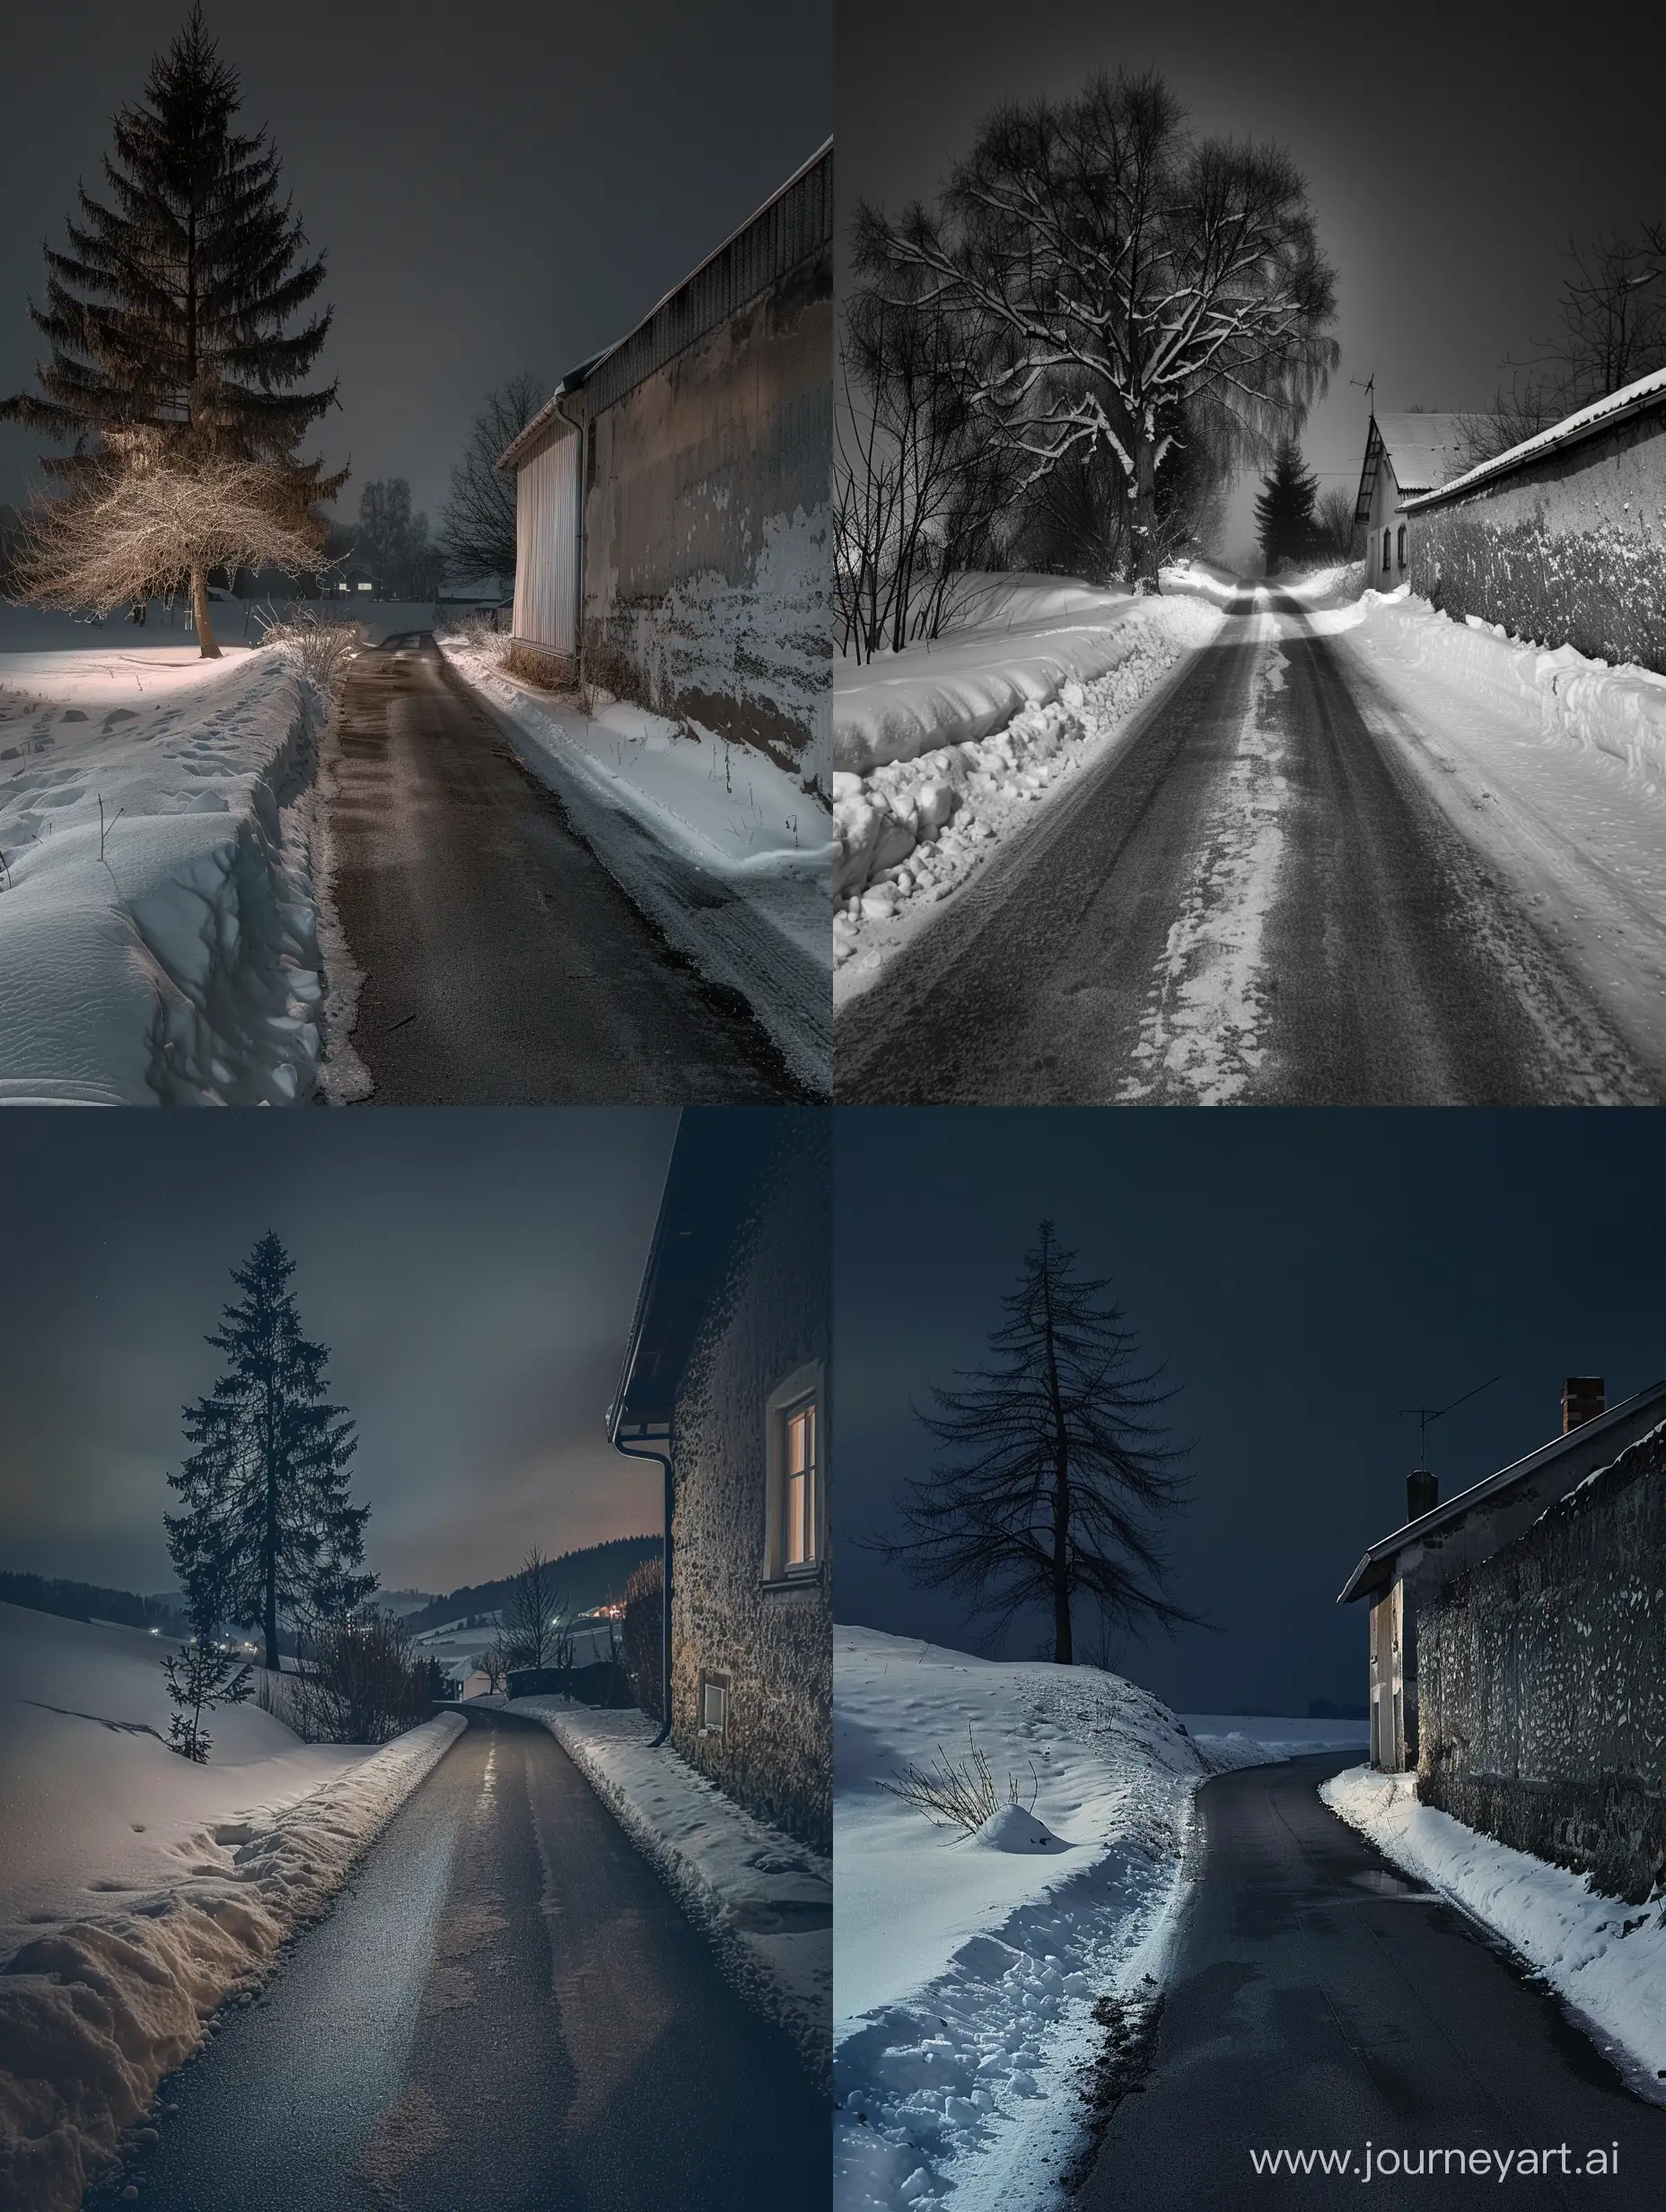 Lonely-Winter-Night-Narrow-Asphalt-Road-and-Snowy-Landscape